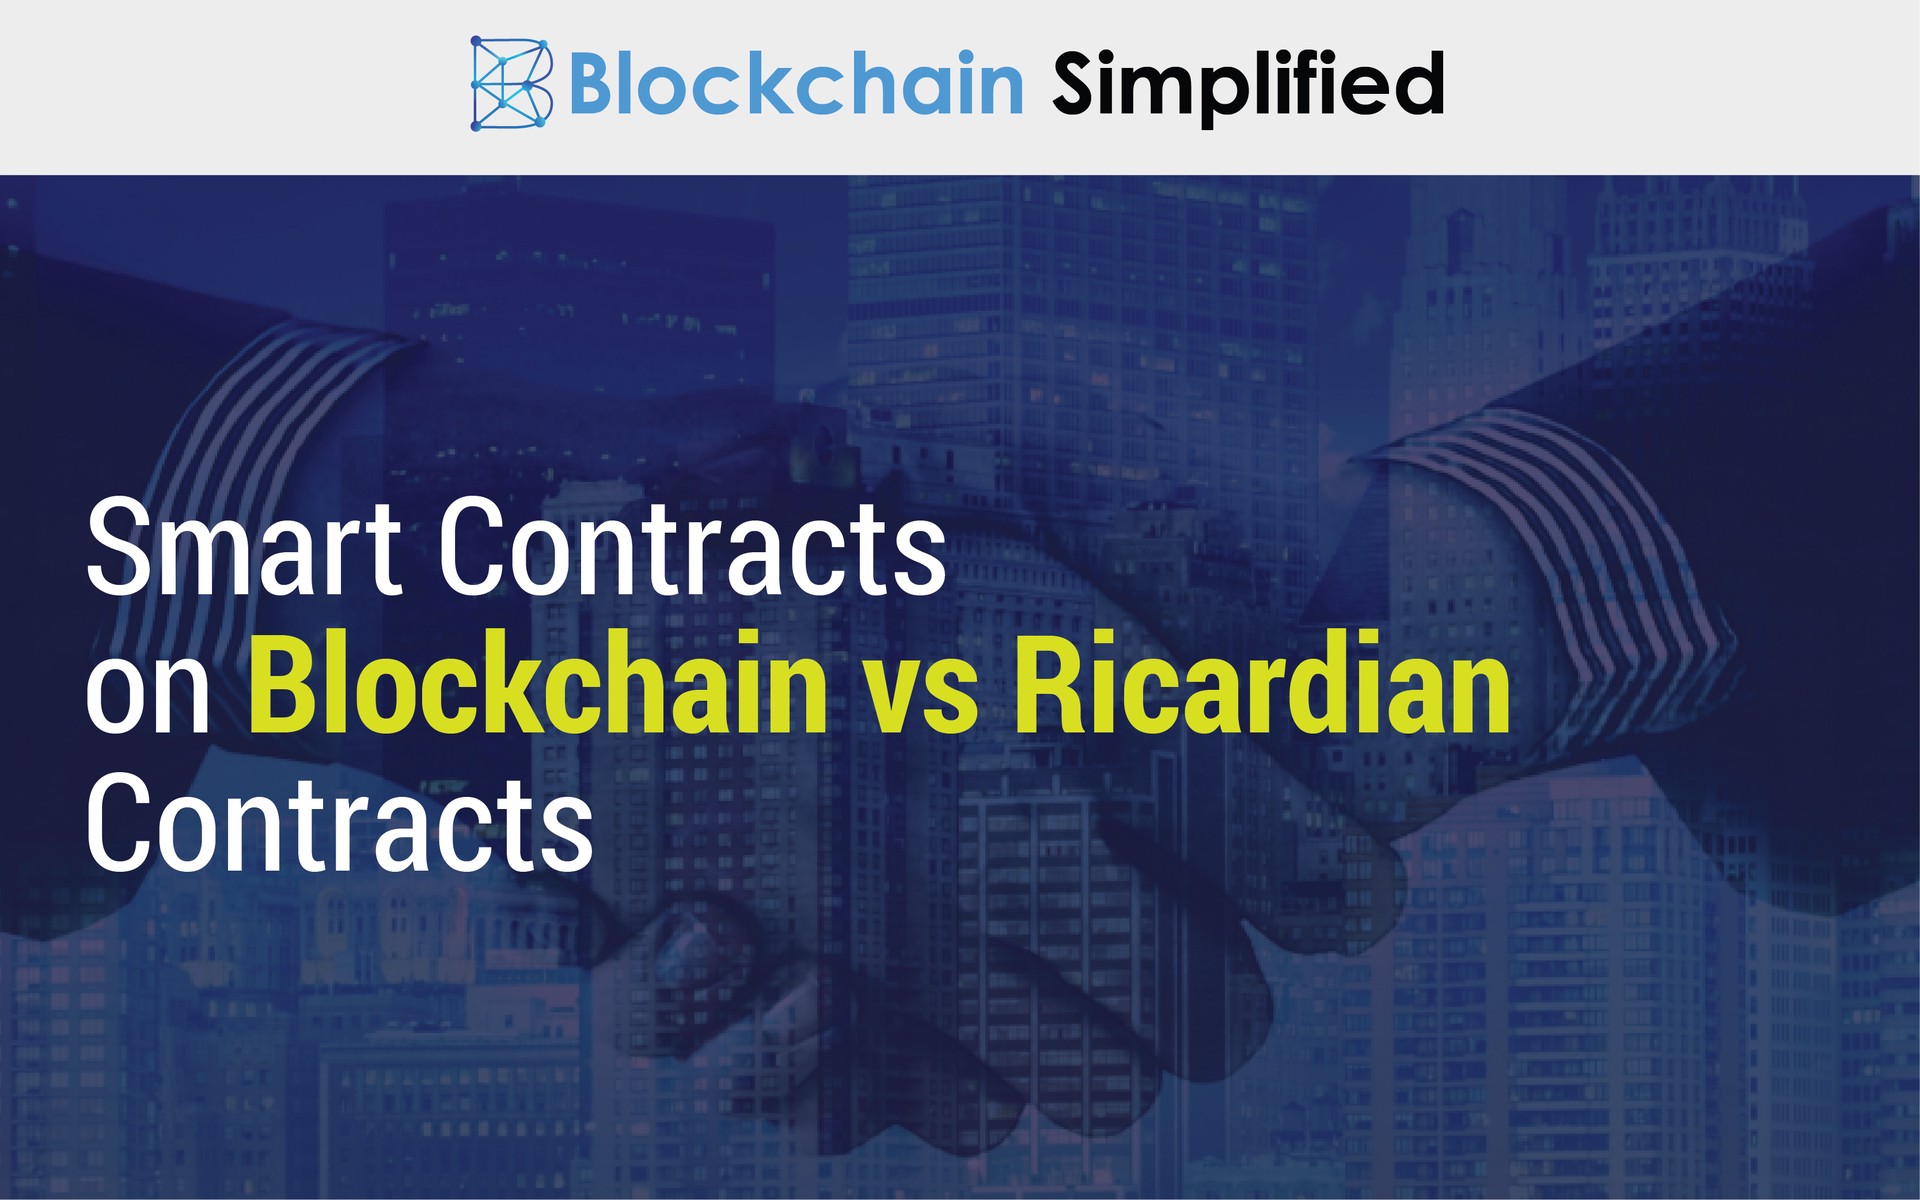 Smart Contracts on Blockchain vs Ricardian Contracts main